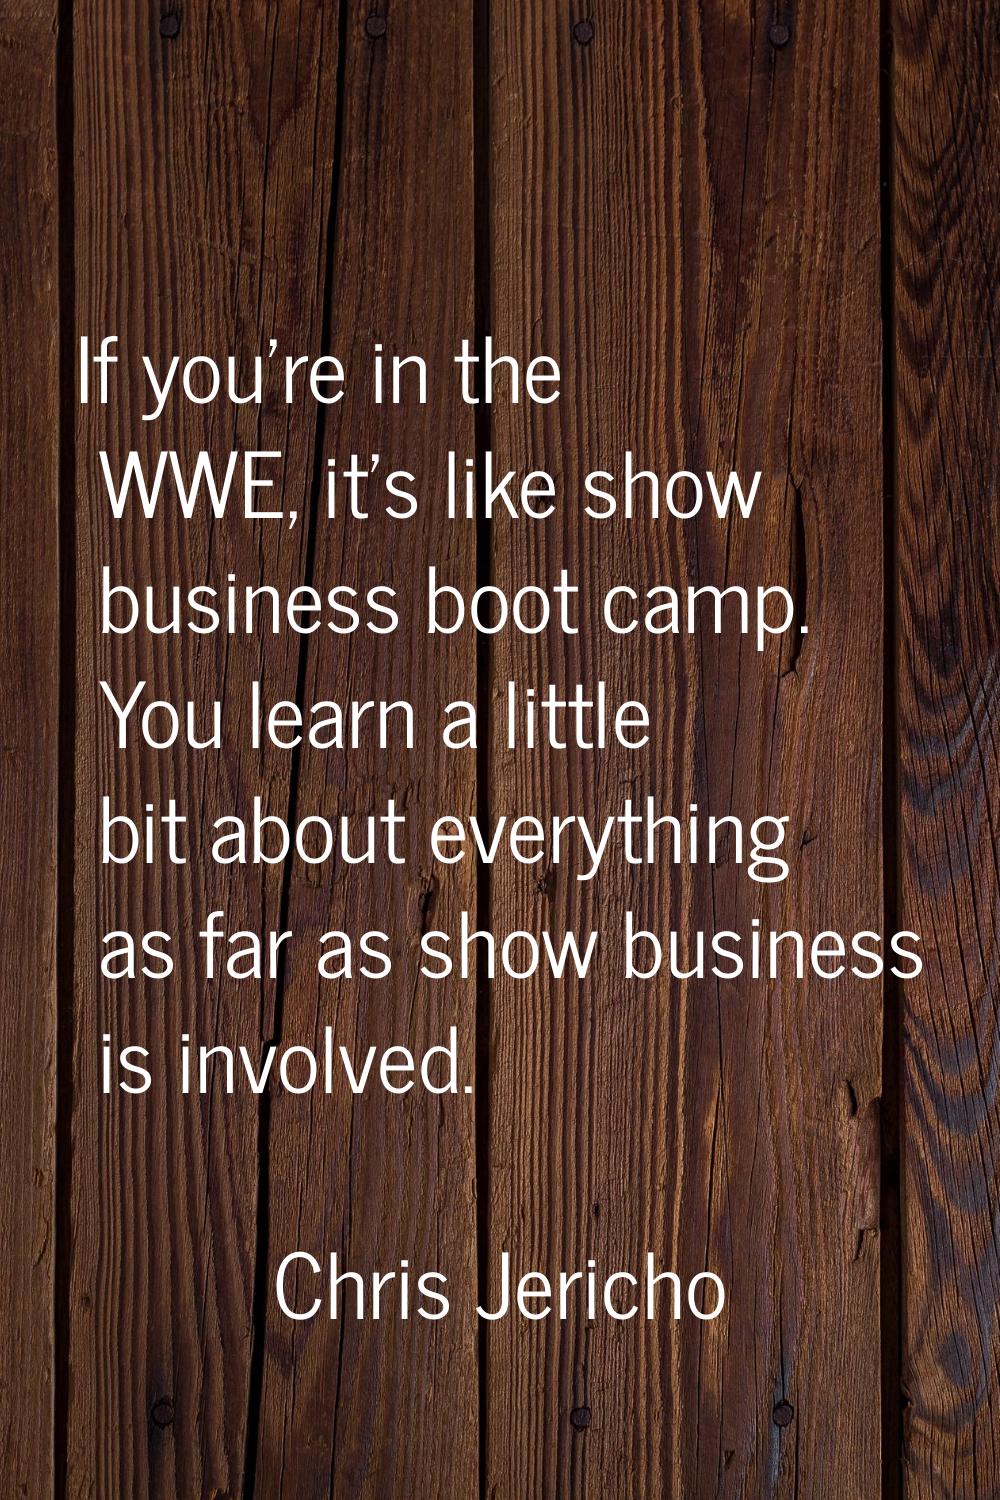 If you're in the WWE, it's like show business boot camp. You learn a little bit about everything as